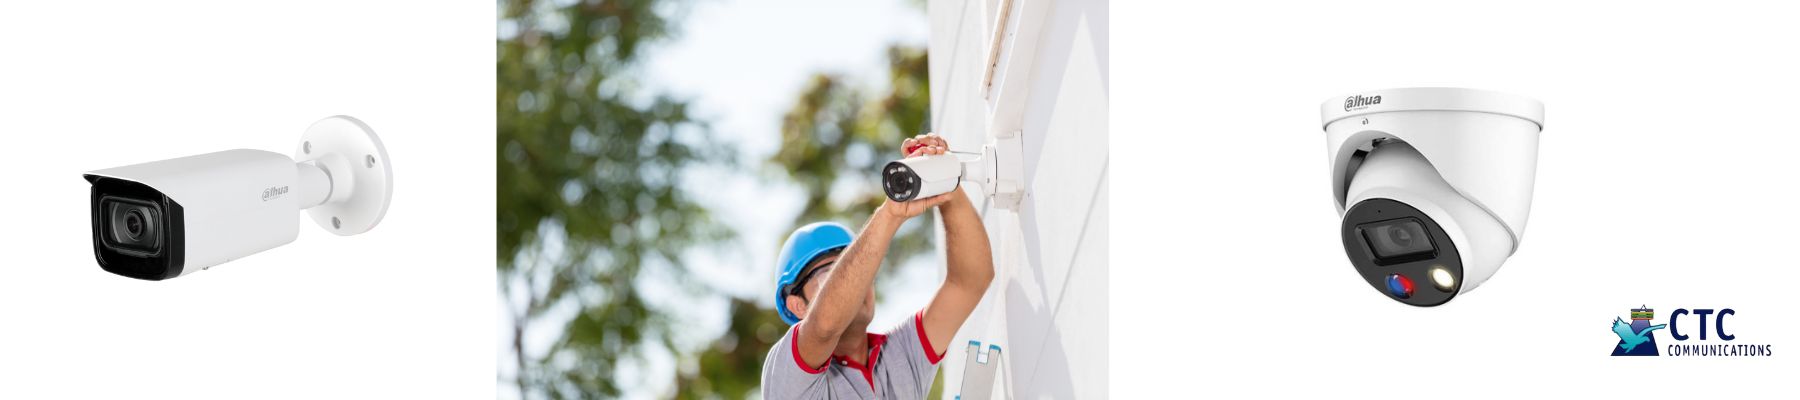 Top factors to consider when installing security cameras in your home